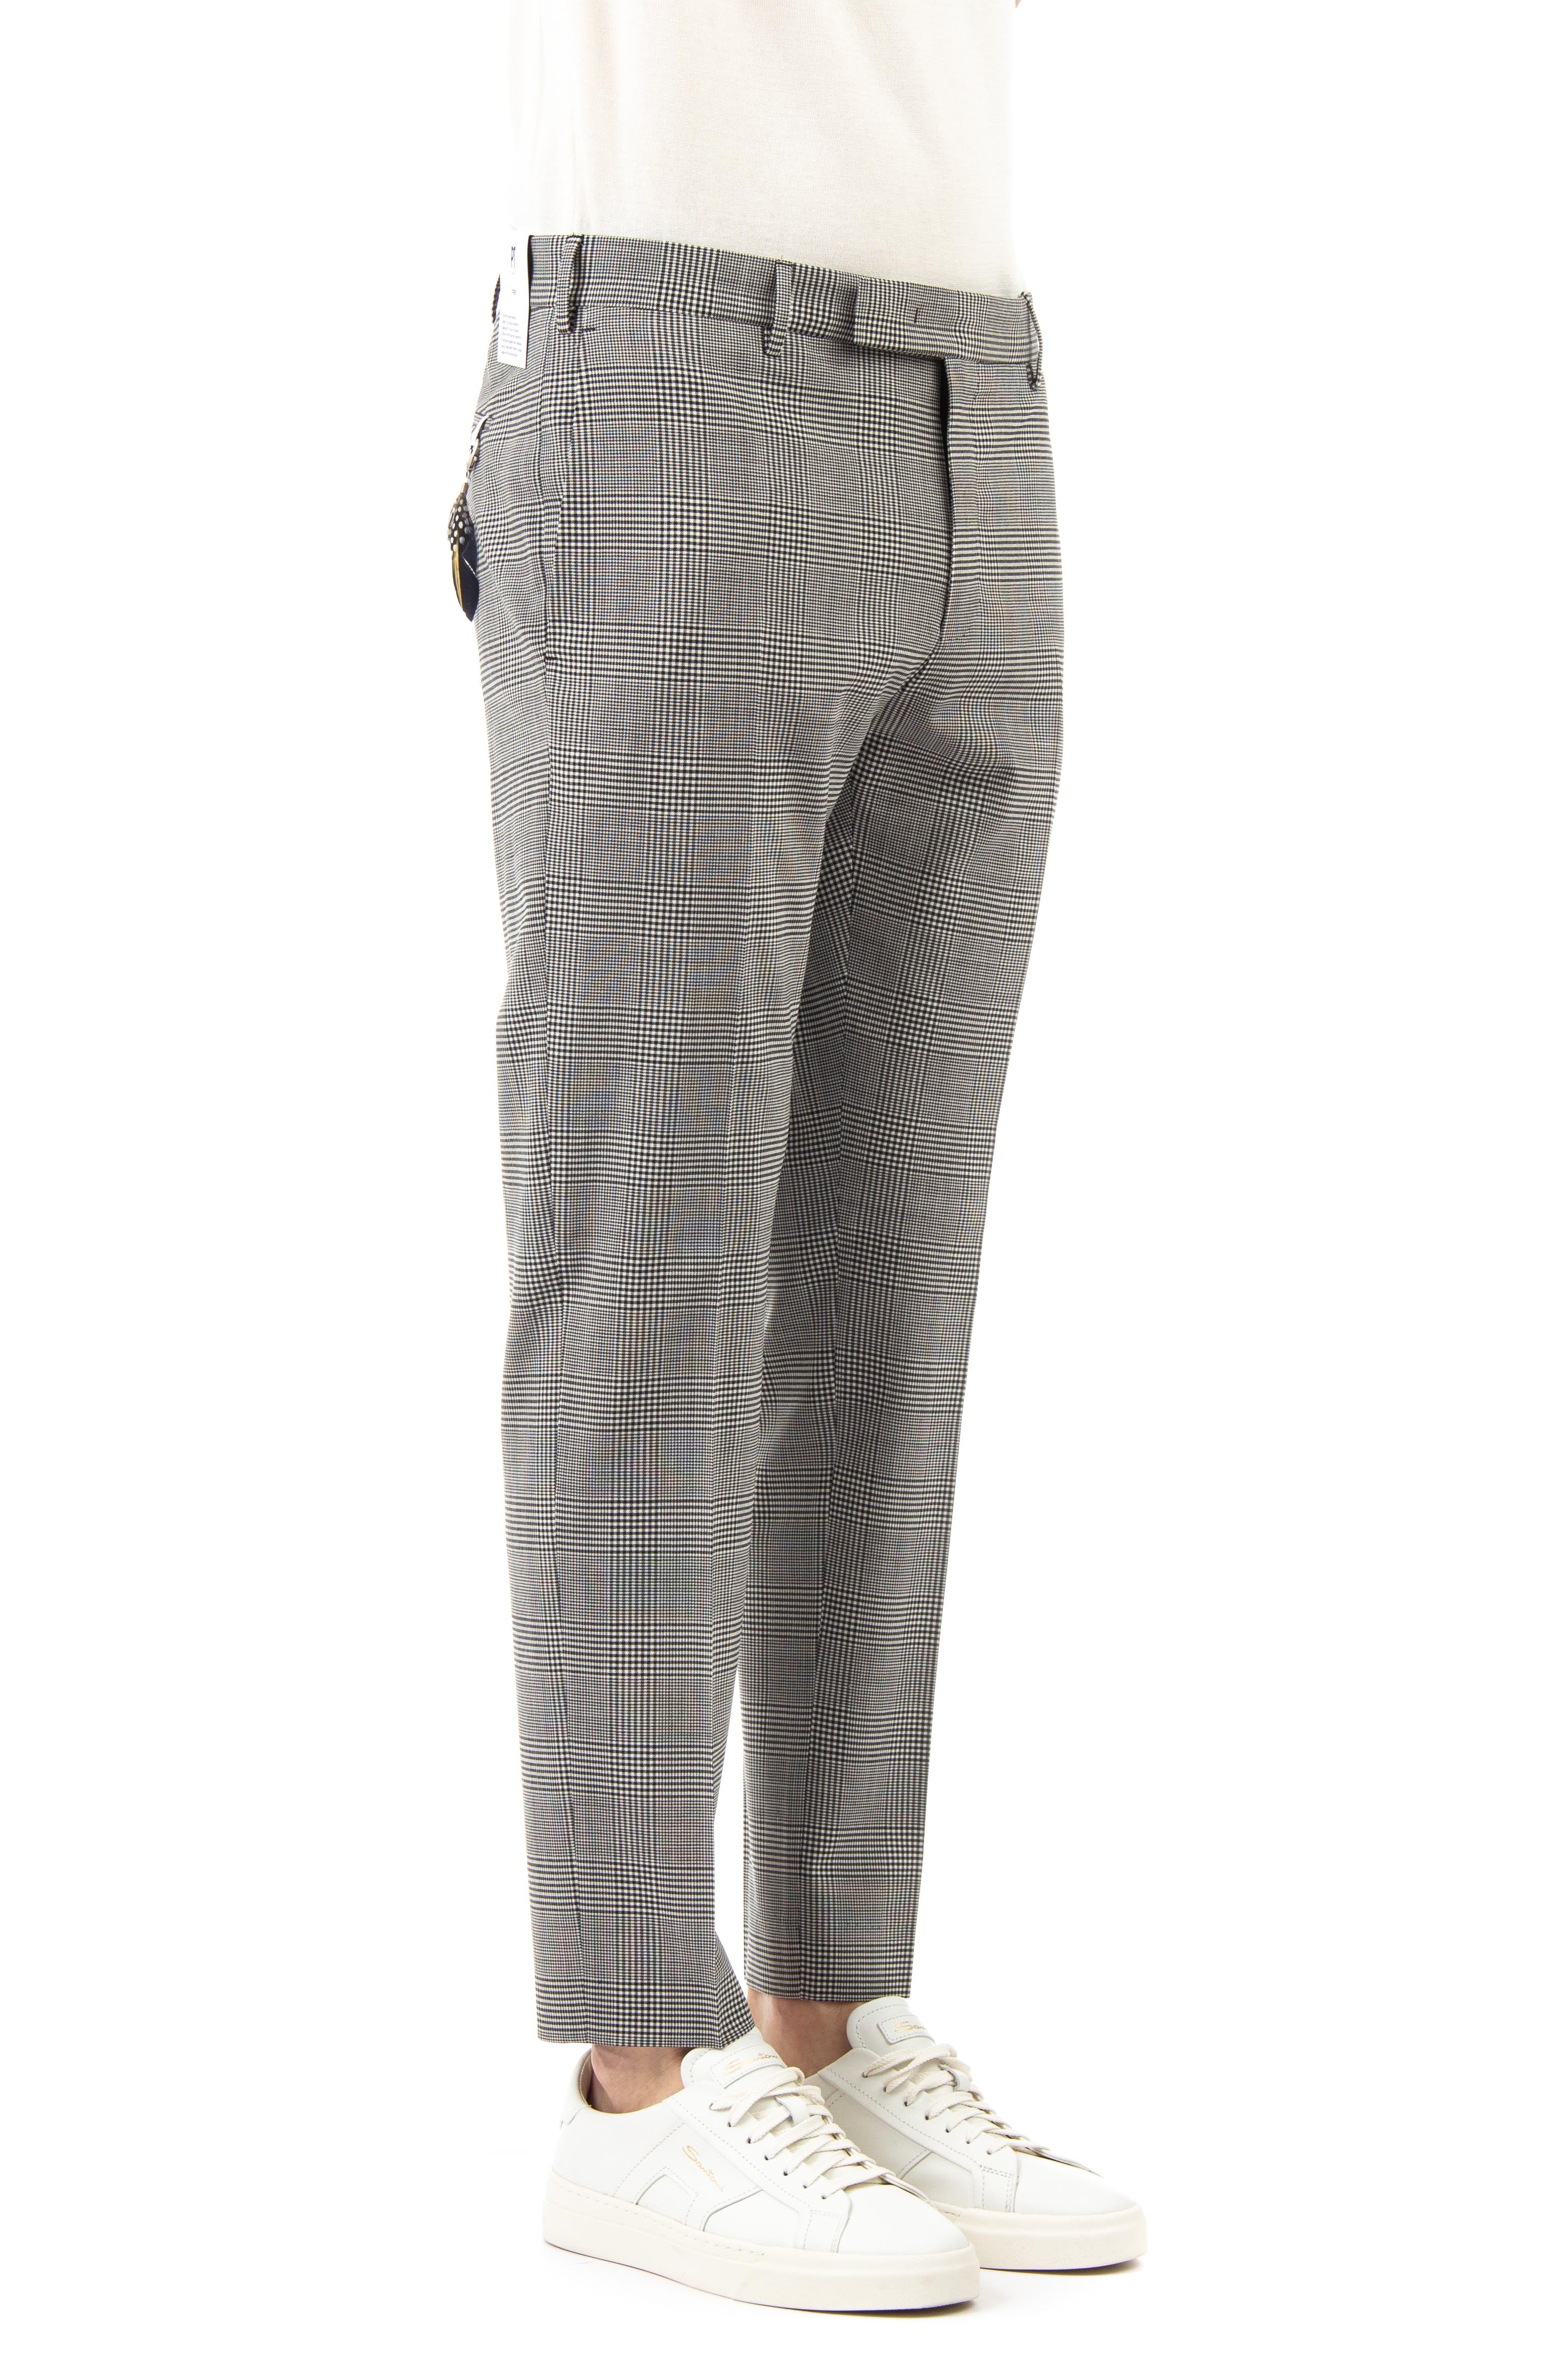 Prince of Wales wool trousers fit ten